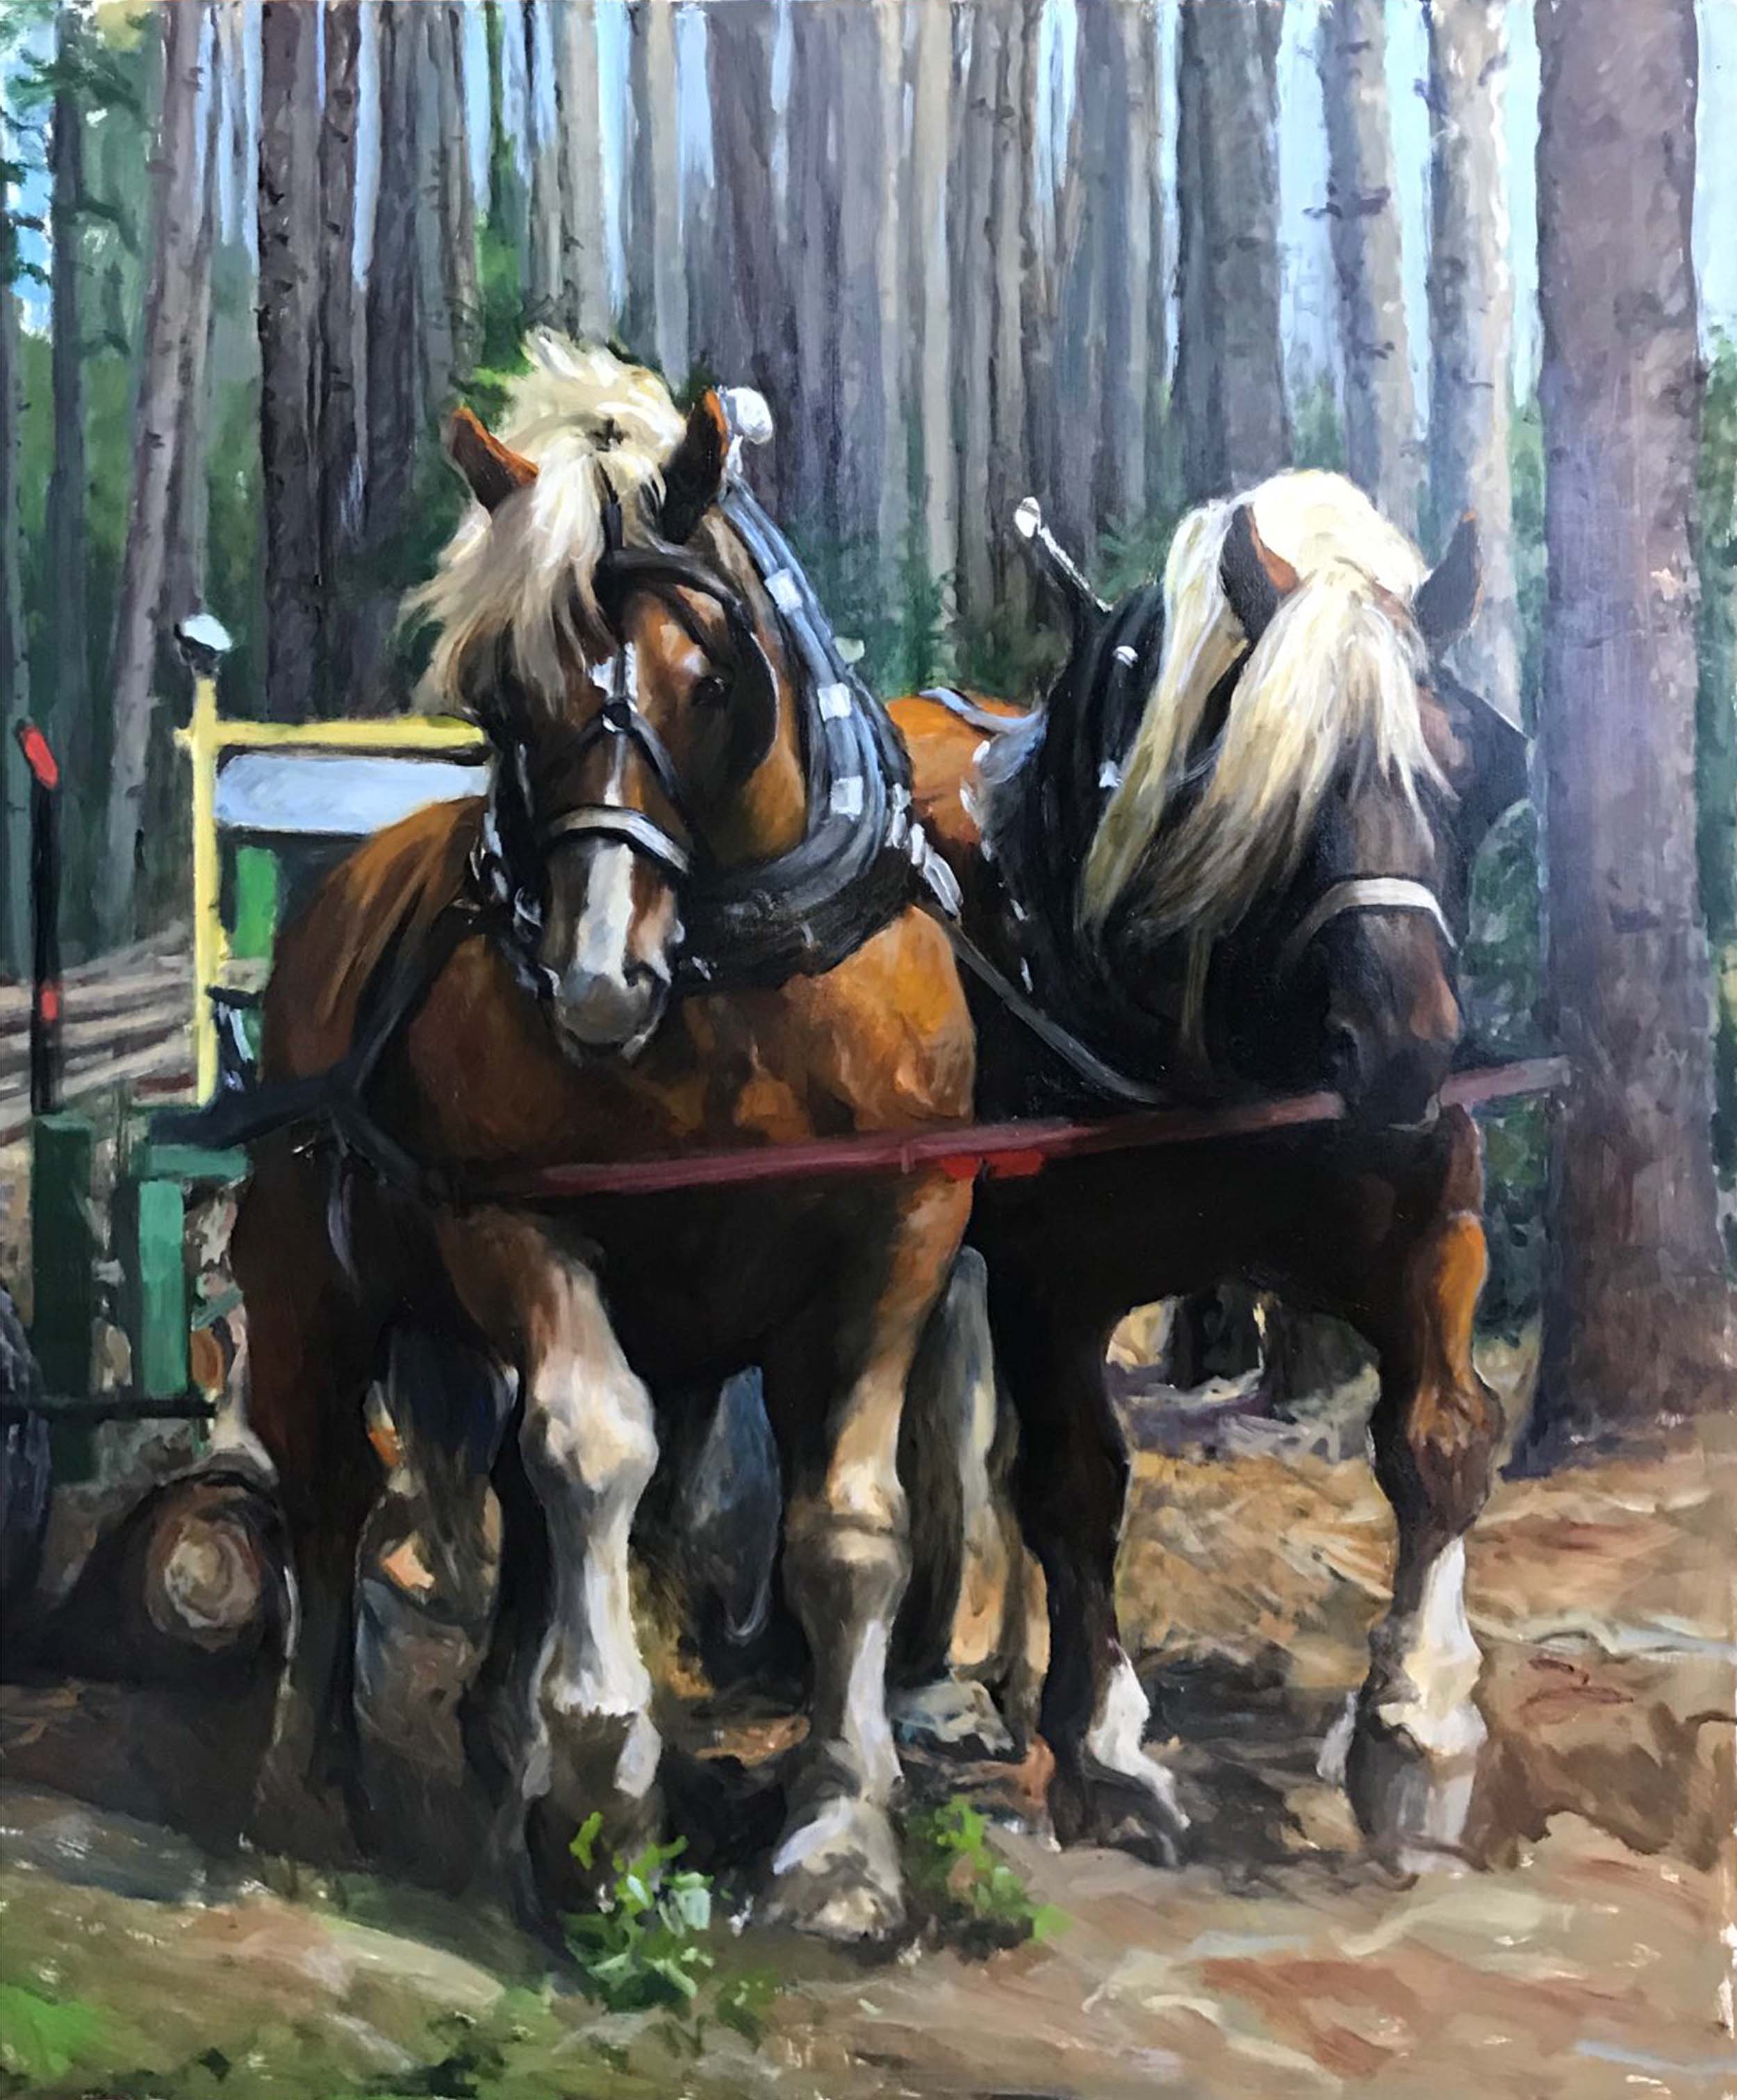 Cleaning Up the Logging Trails. 36" x 48"